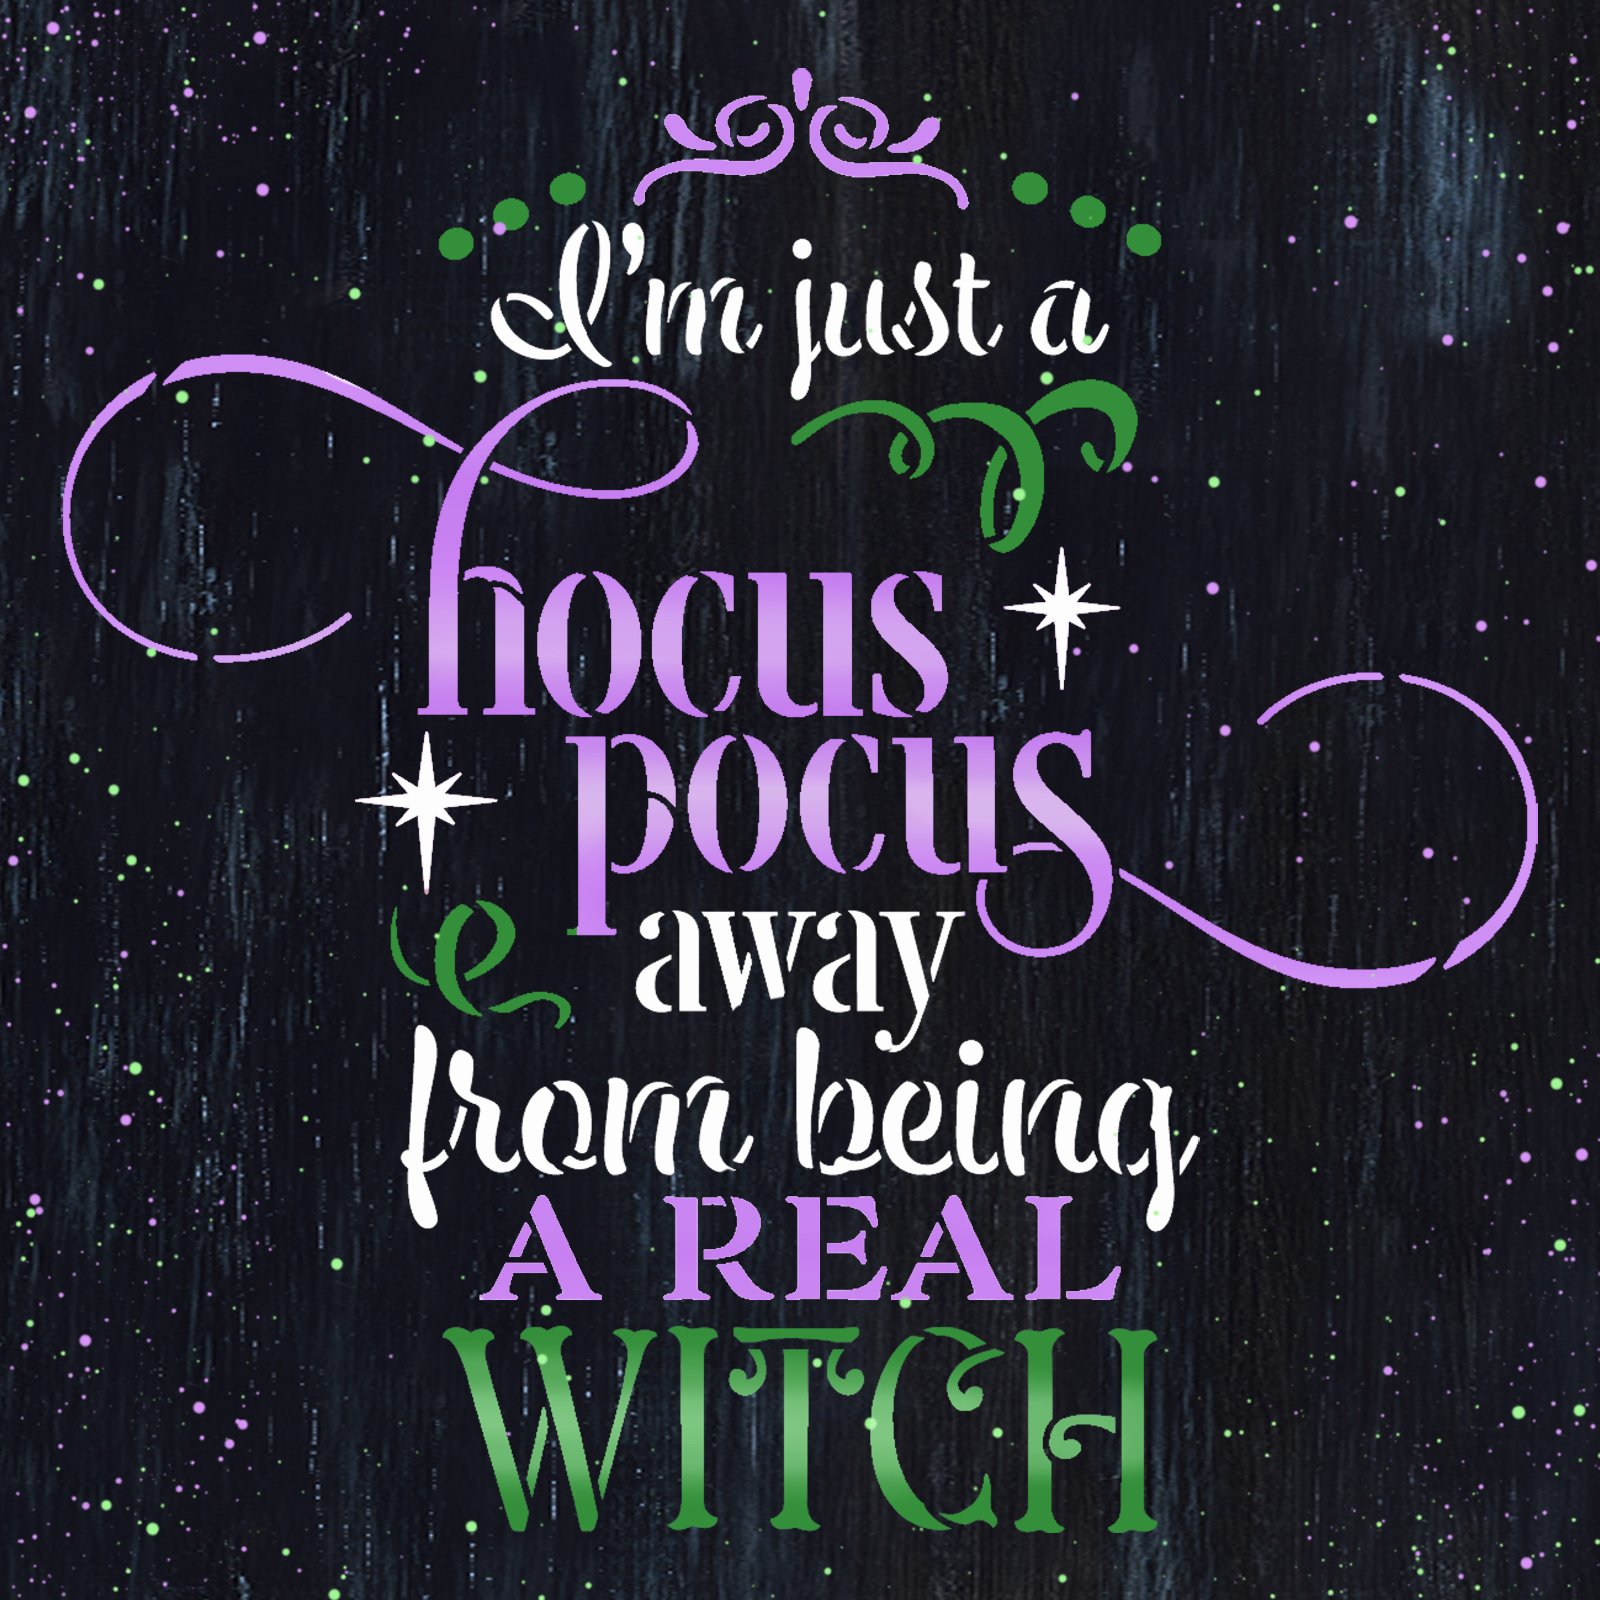 Hocus Pocus Real Witch Stencil by StudioR12 | DIY October Halloween Home Decor | Craft & Paint Autumn Wood Sign Reusable Mylar Template | Select Size